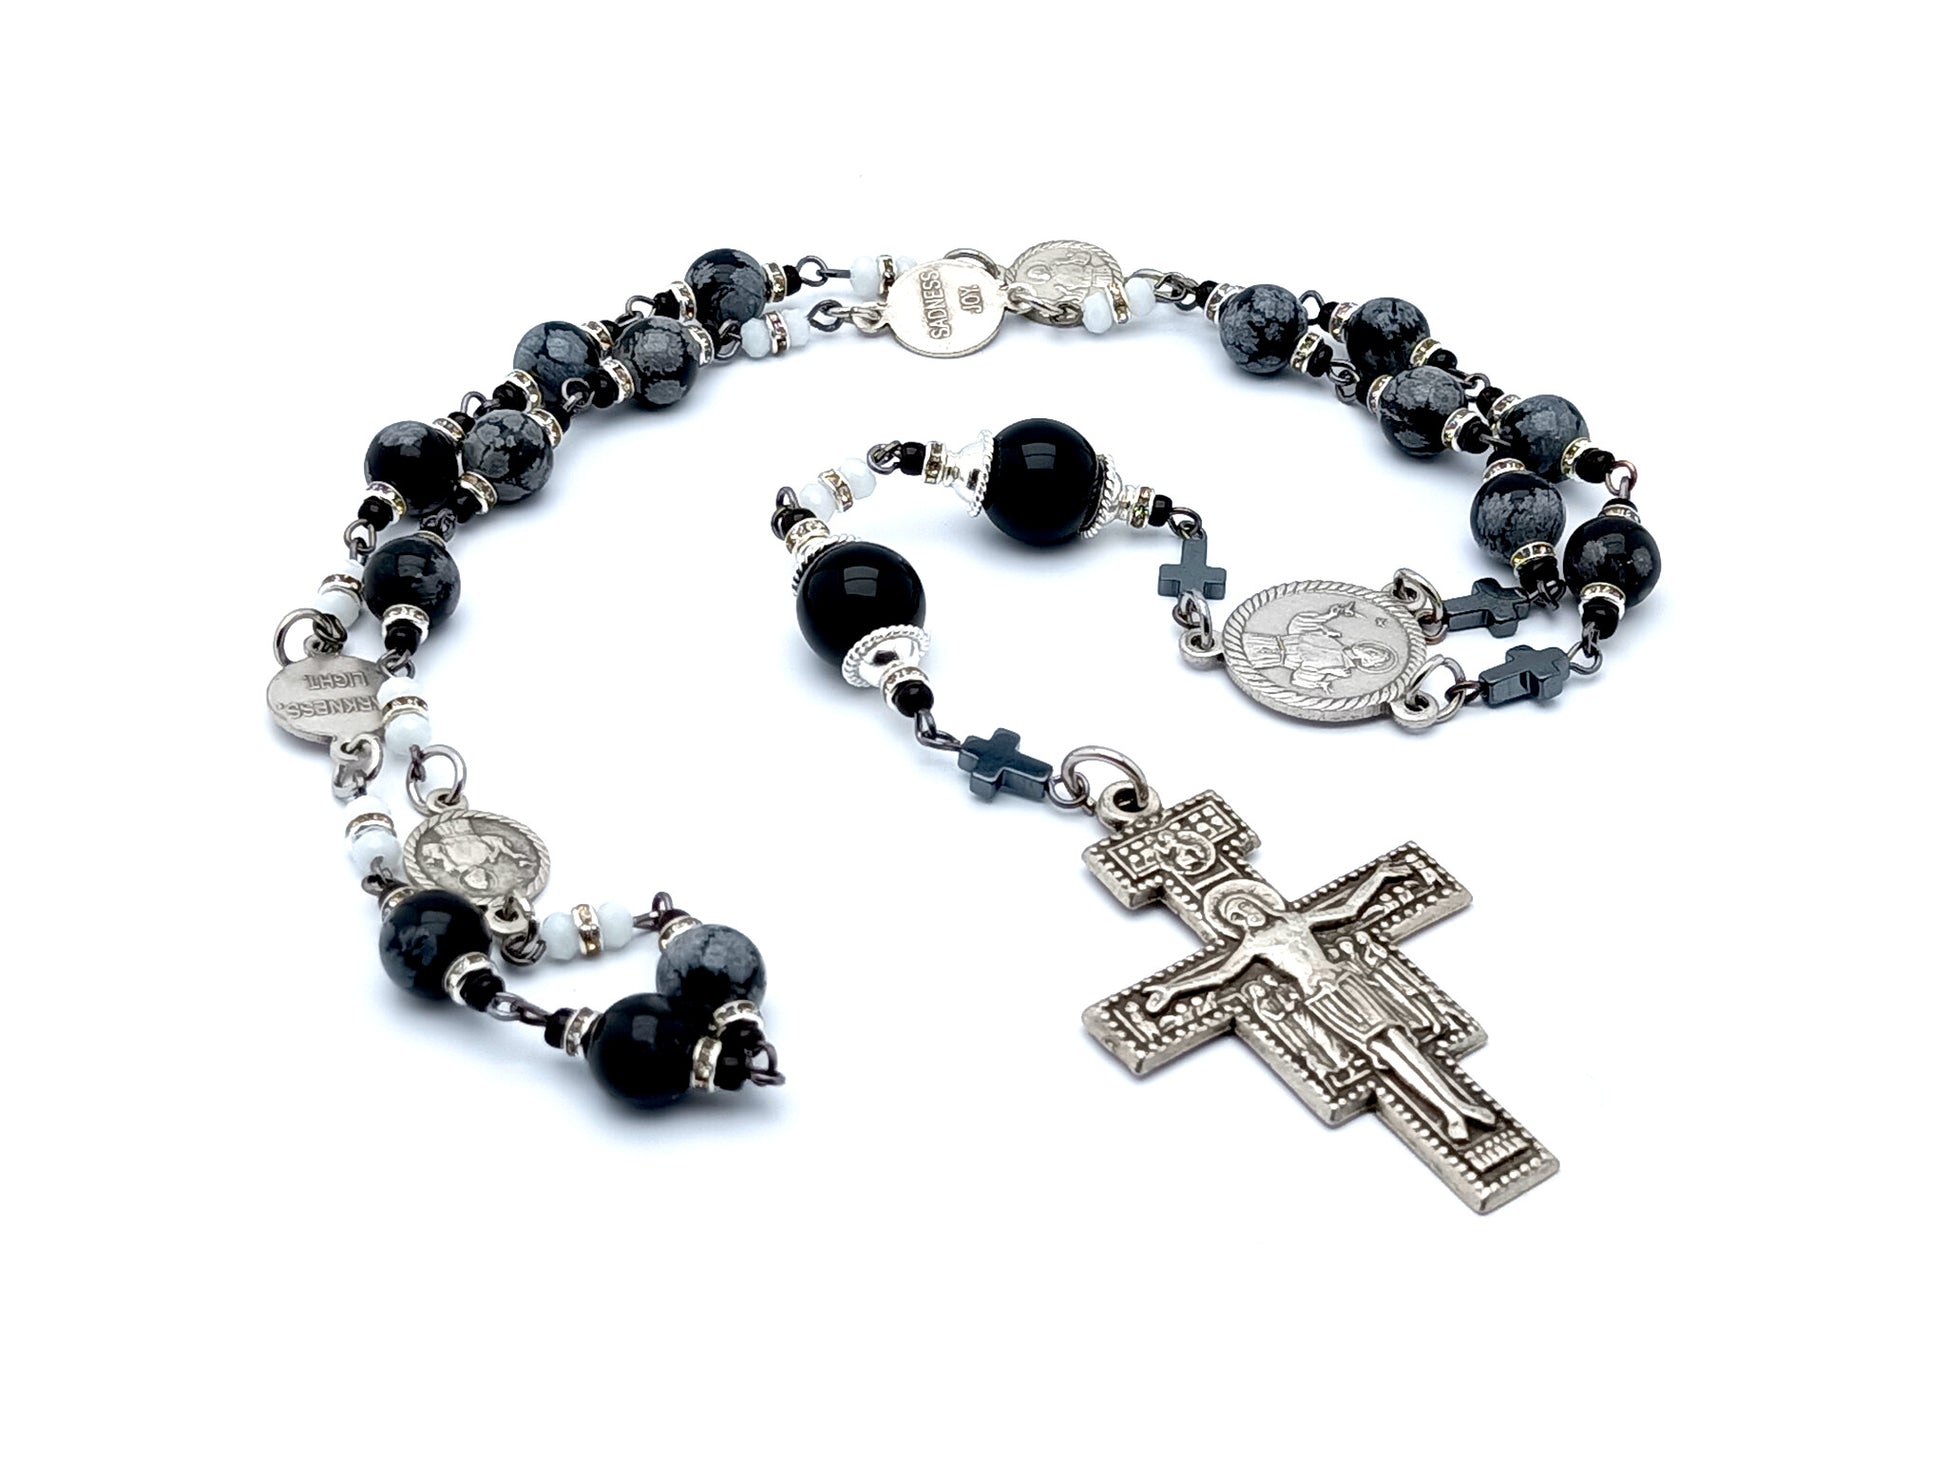 Saint Francis of Assisi unique rosary beads prayer chaplet with snowflake gemstone prayer and silver prayer medal beads and Saint Francis prayer crucifix.